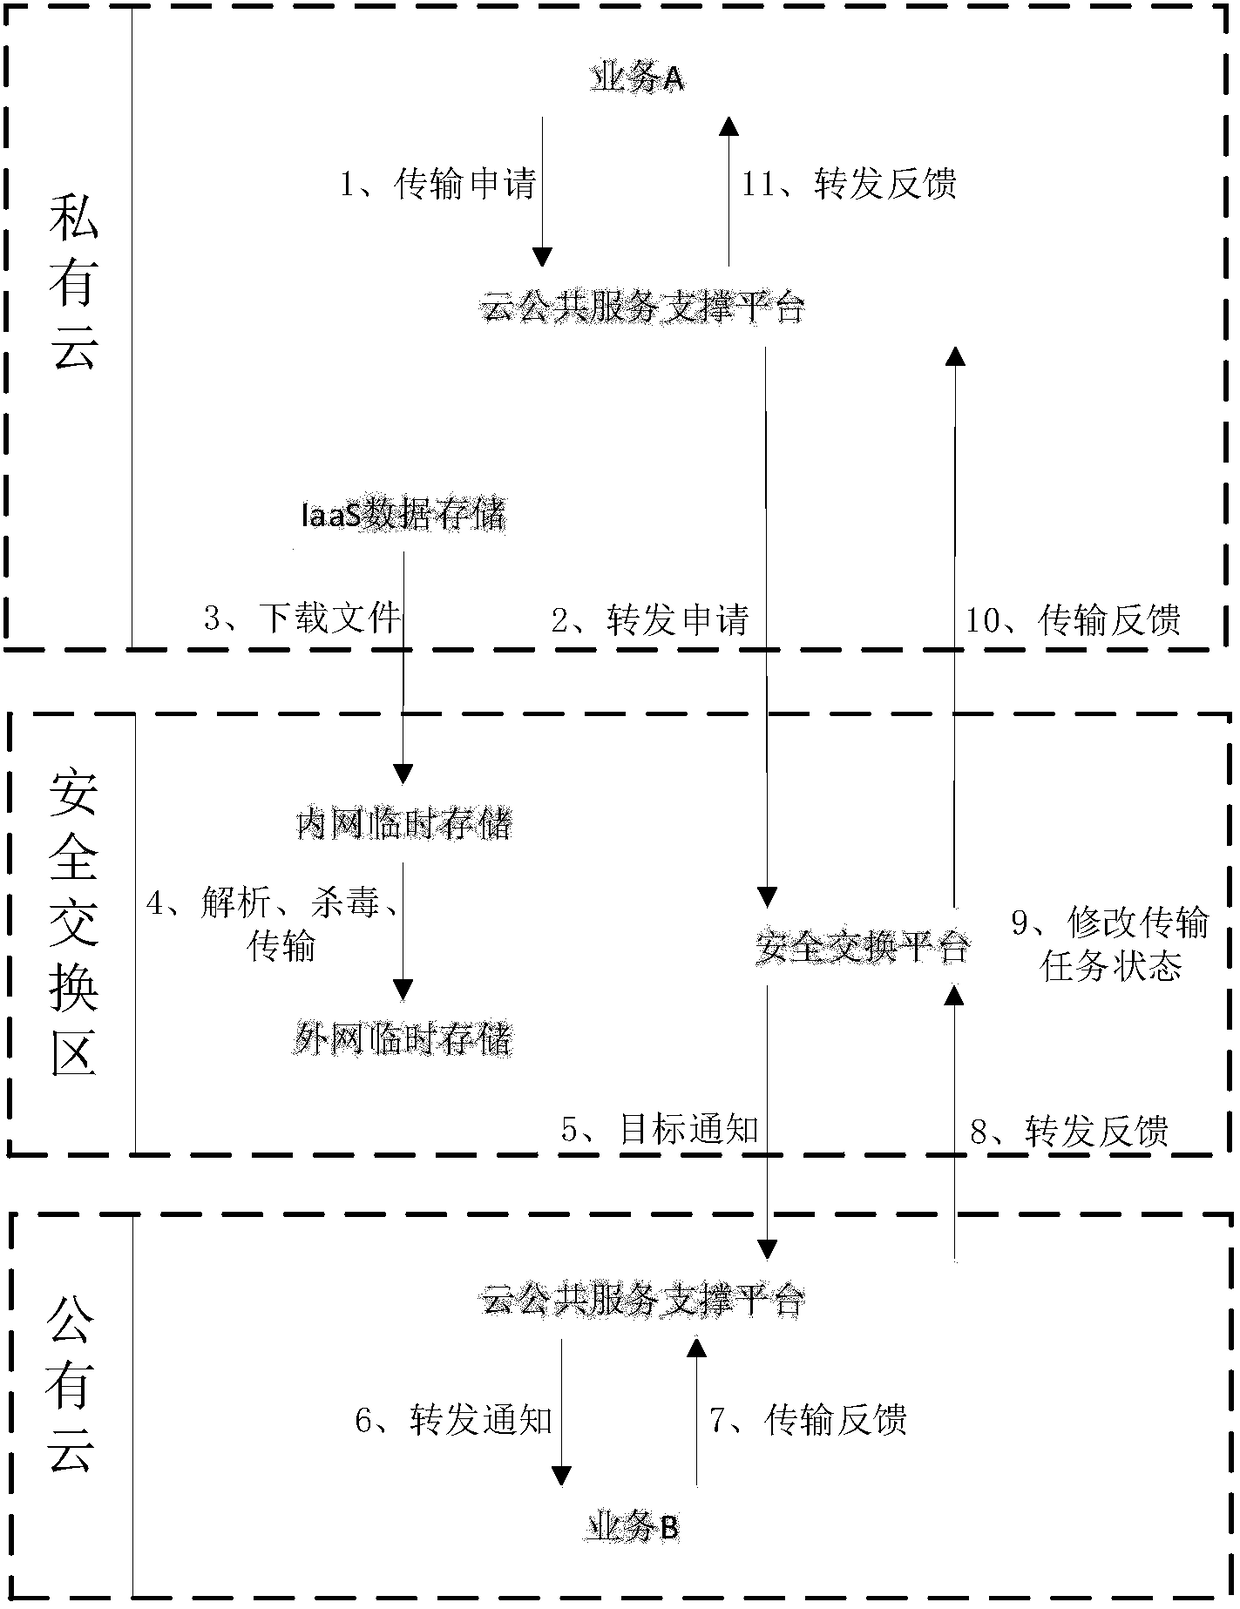 Multilayer internal and external network data interaction system applied to television station